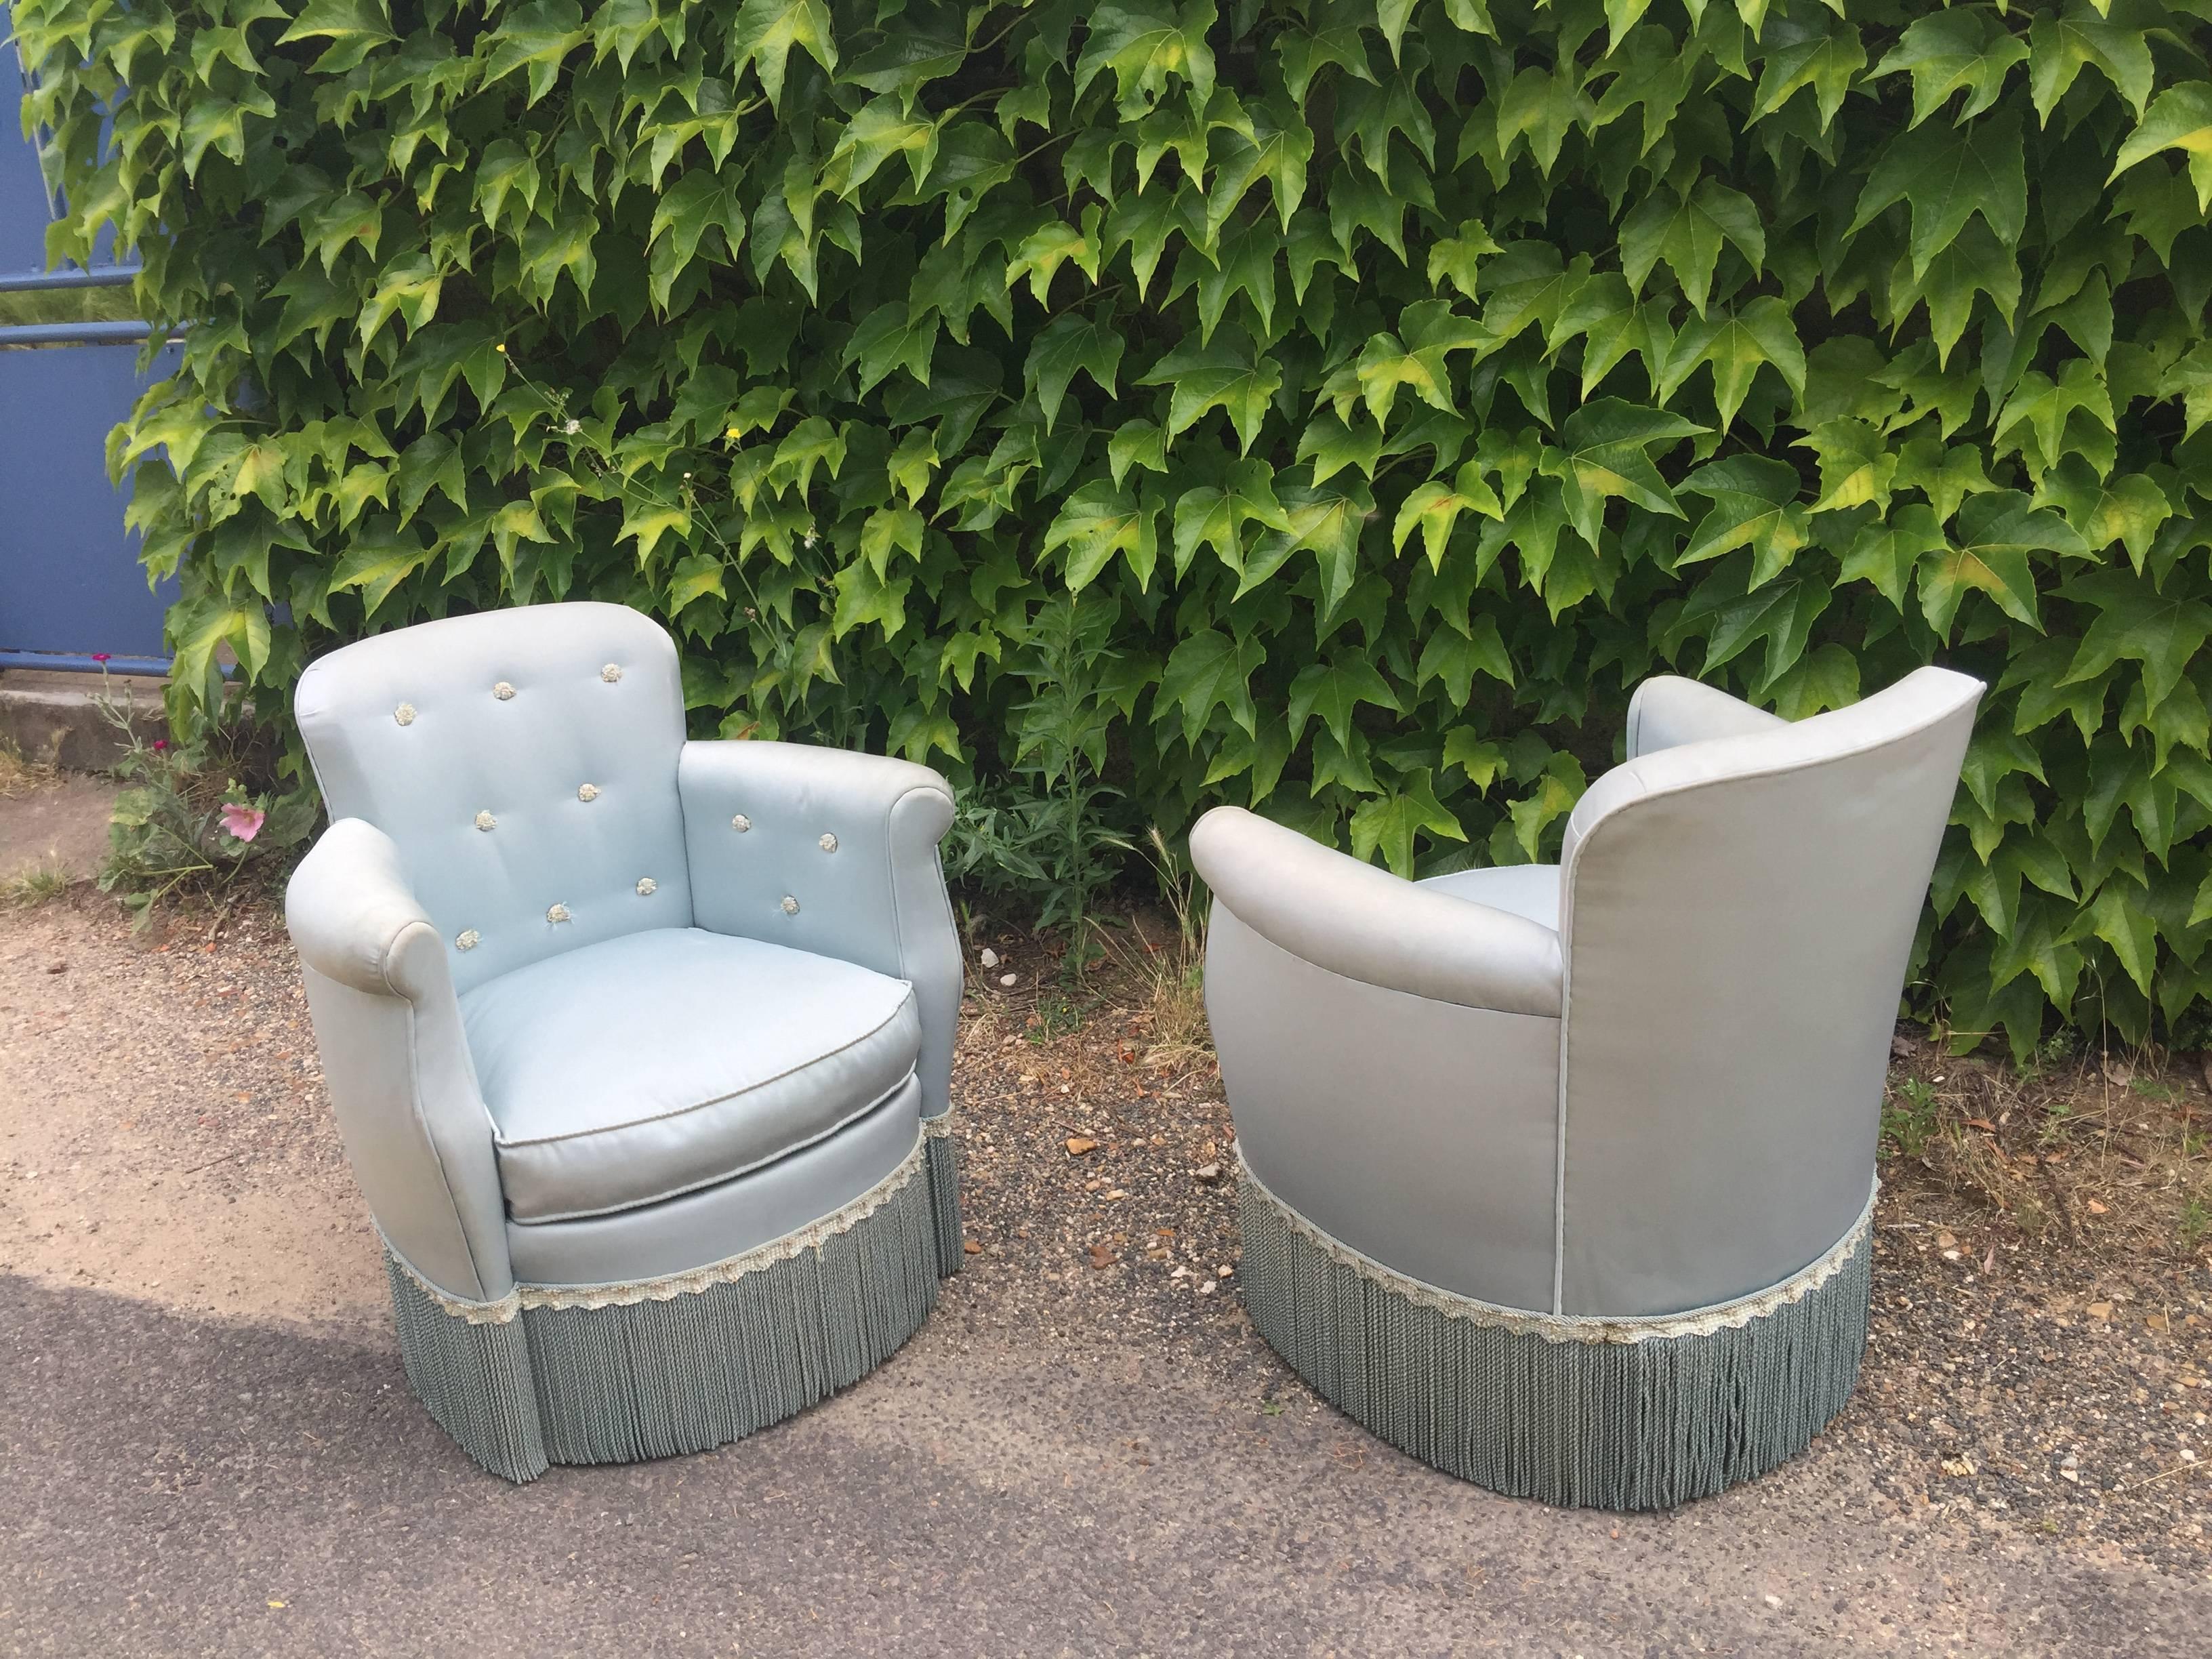 Pair of Art Deco armchairs in the style of André Arbus
Covered with satin
Worn out fabric.